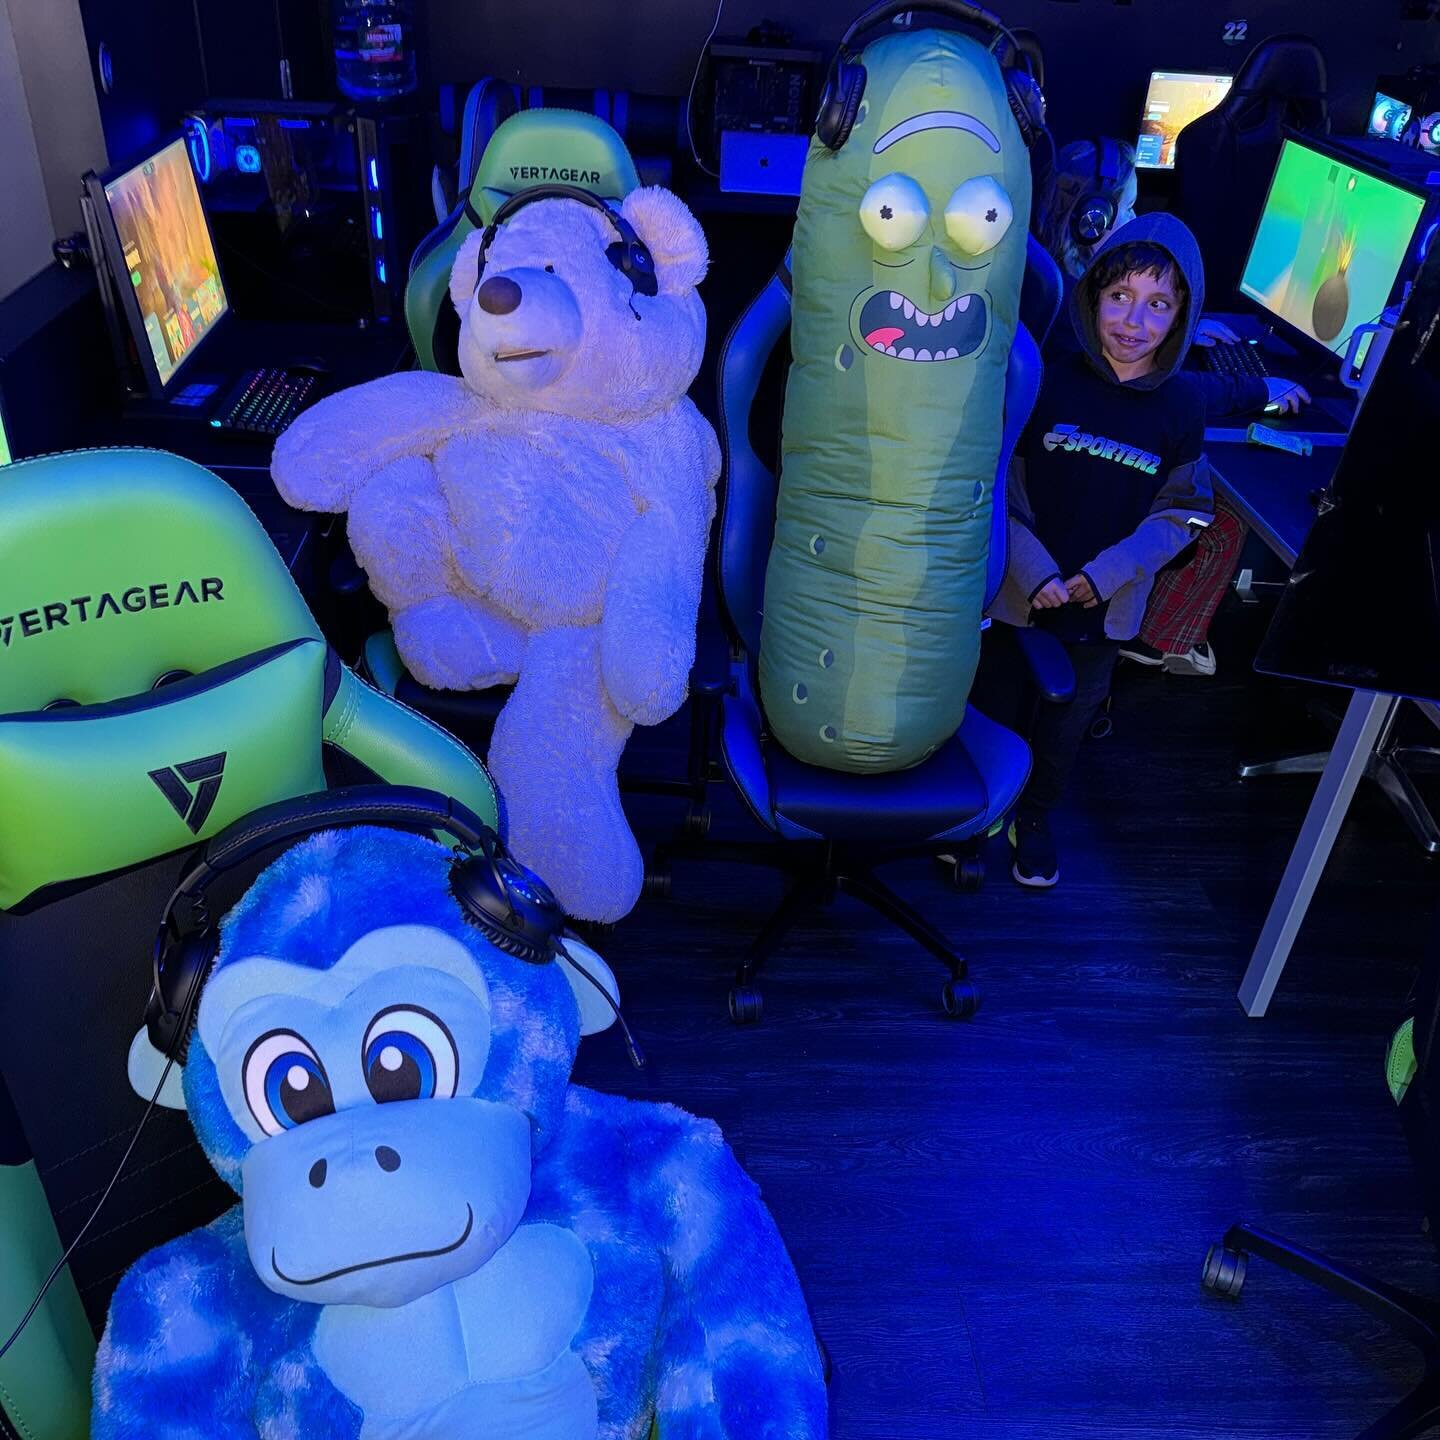 Our campers brought their stuffy and PJ game today! Go big or go home!

www.Esporterz.com/camps

#camps #gaming #esports #stemeducation #codingforkids #playtogether #minecraft #roblox #teamwork #valorant #fortnite #smashbrosultimate #leagueoflegends 